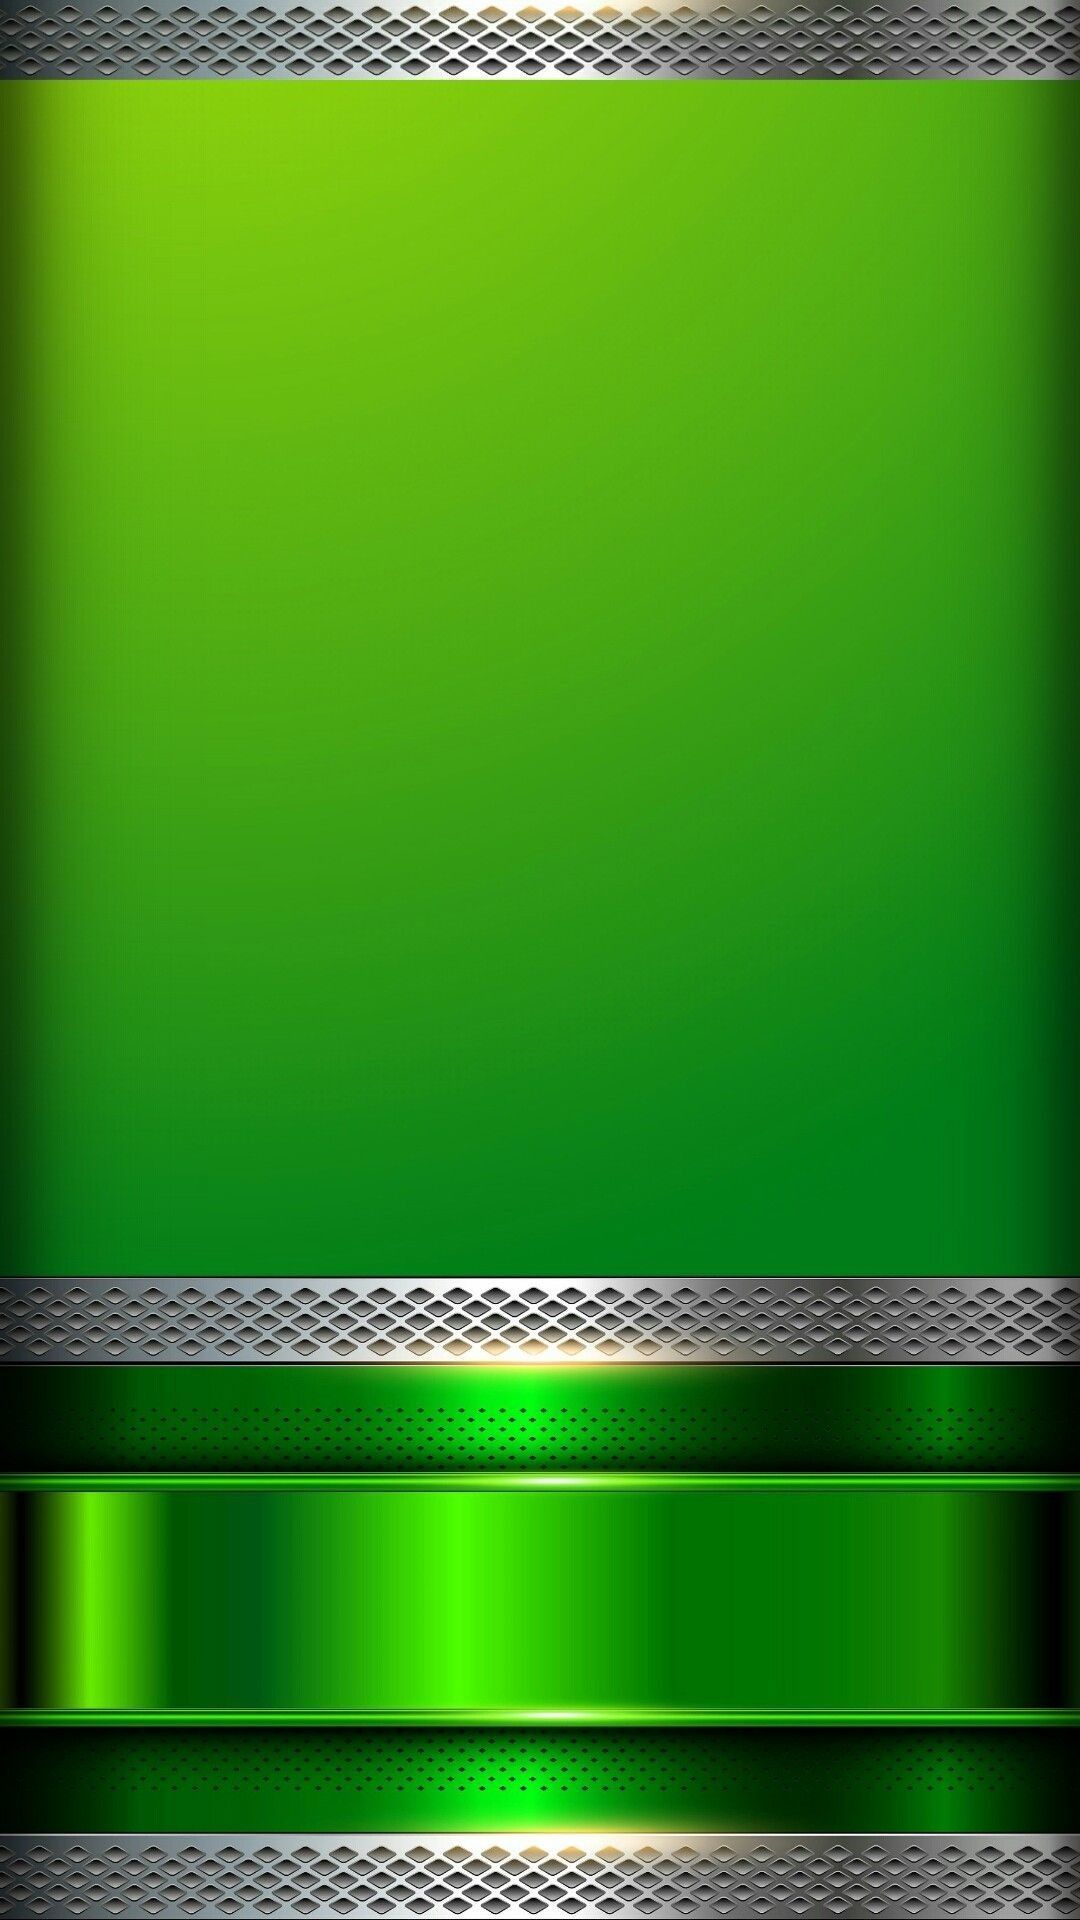 Green And Gold Wallpaper iPhone. Gold wallpaper iphone, Gold wallpaper, Metallic wallpaper